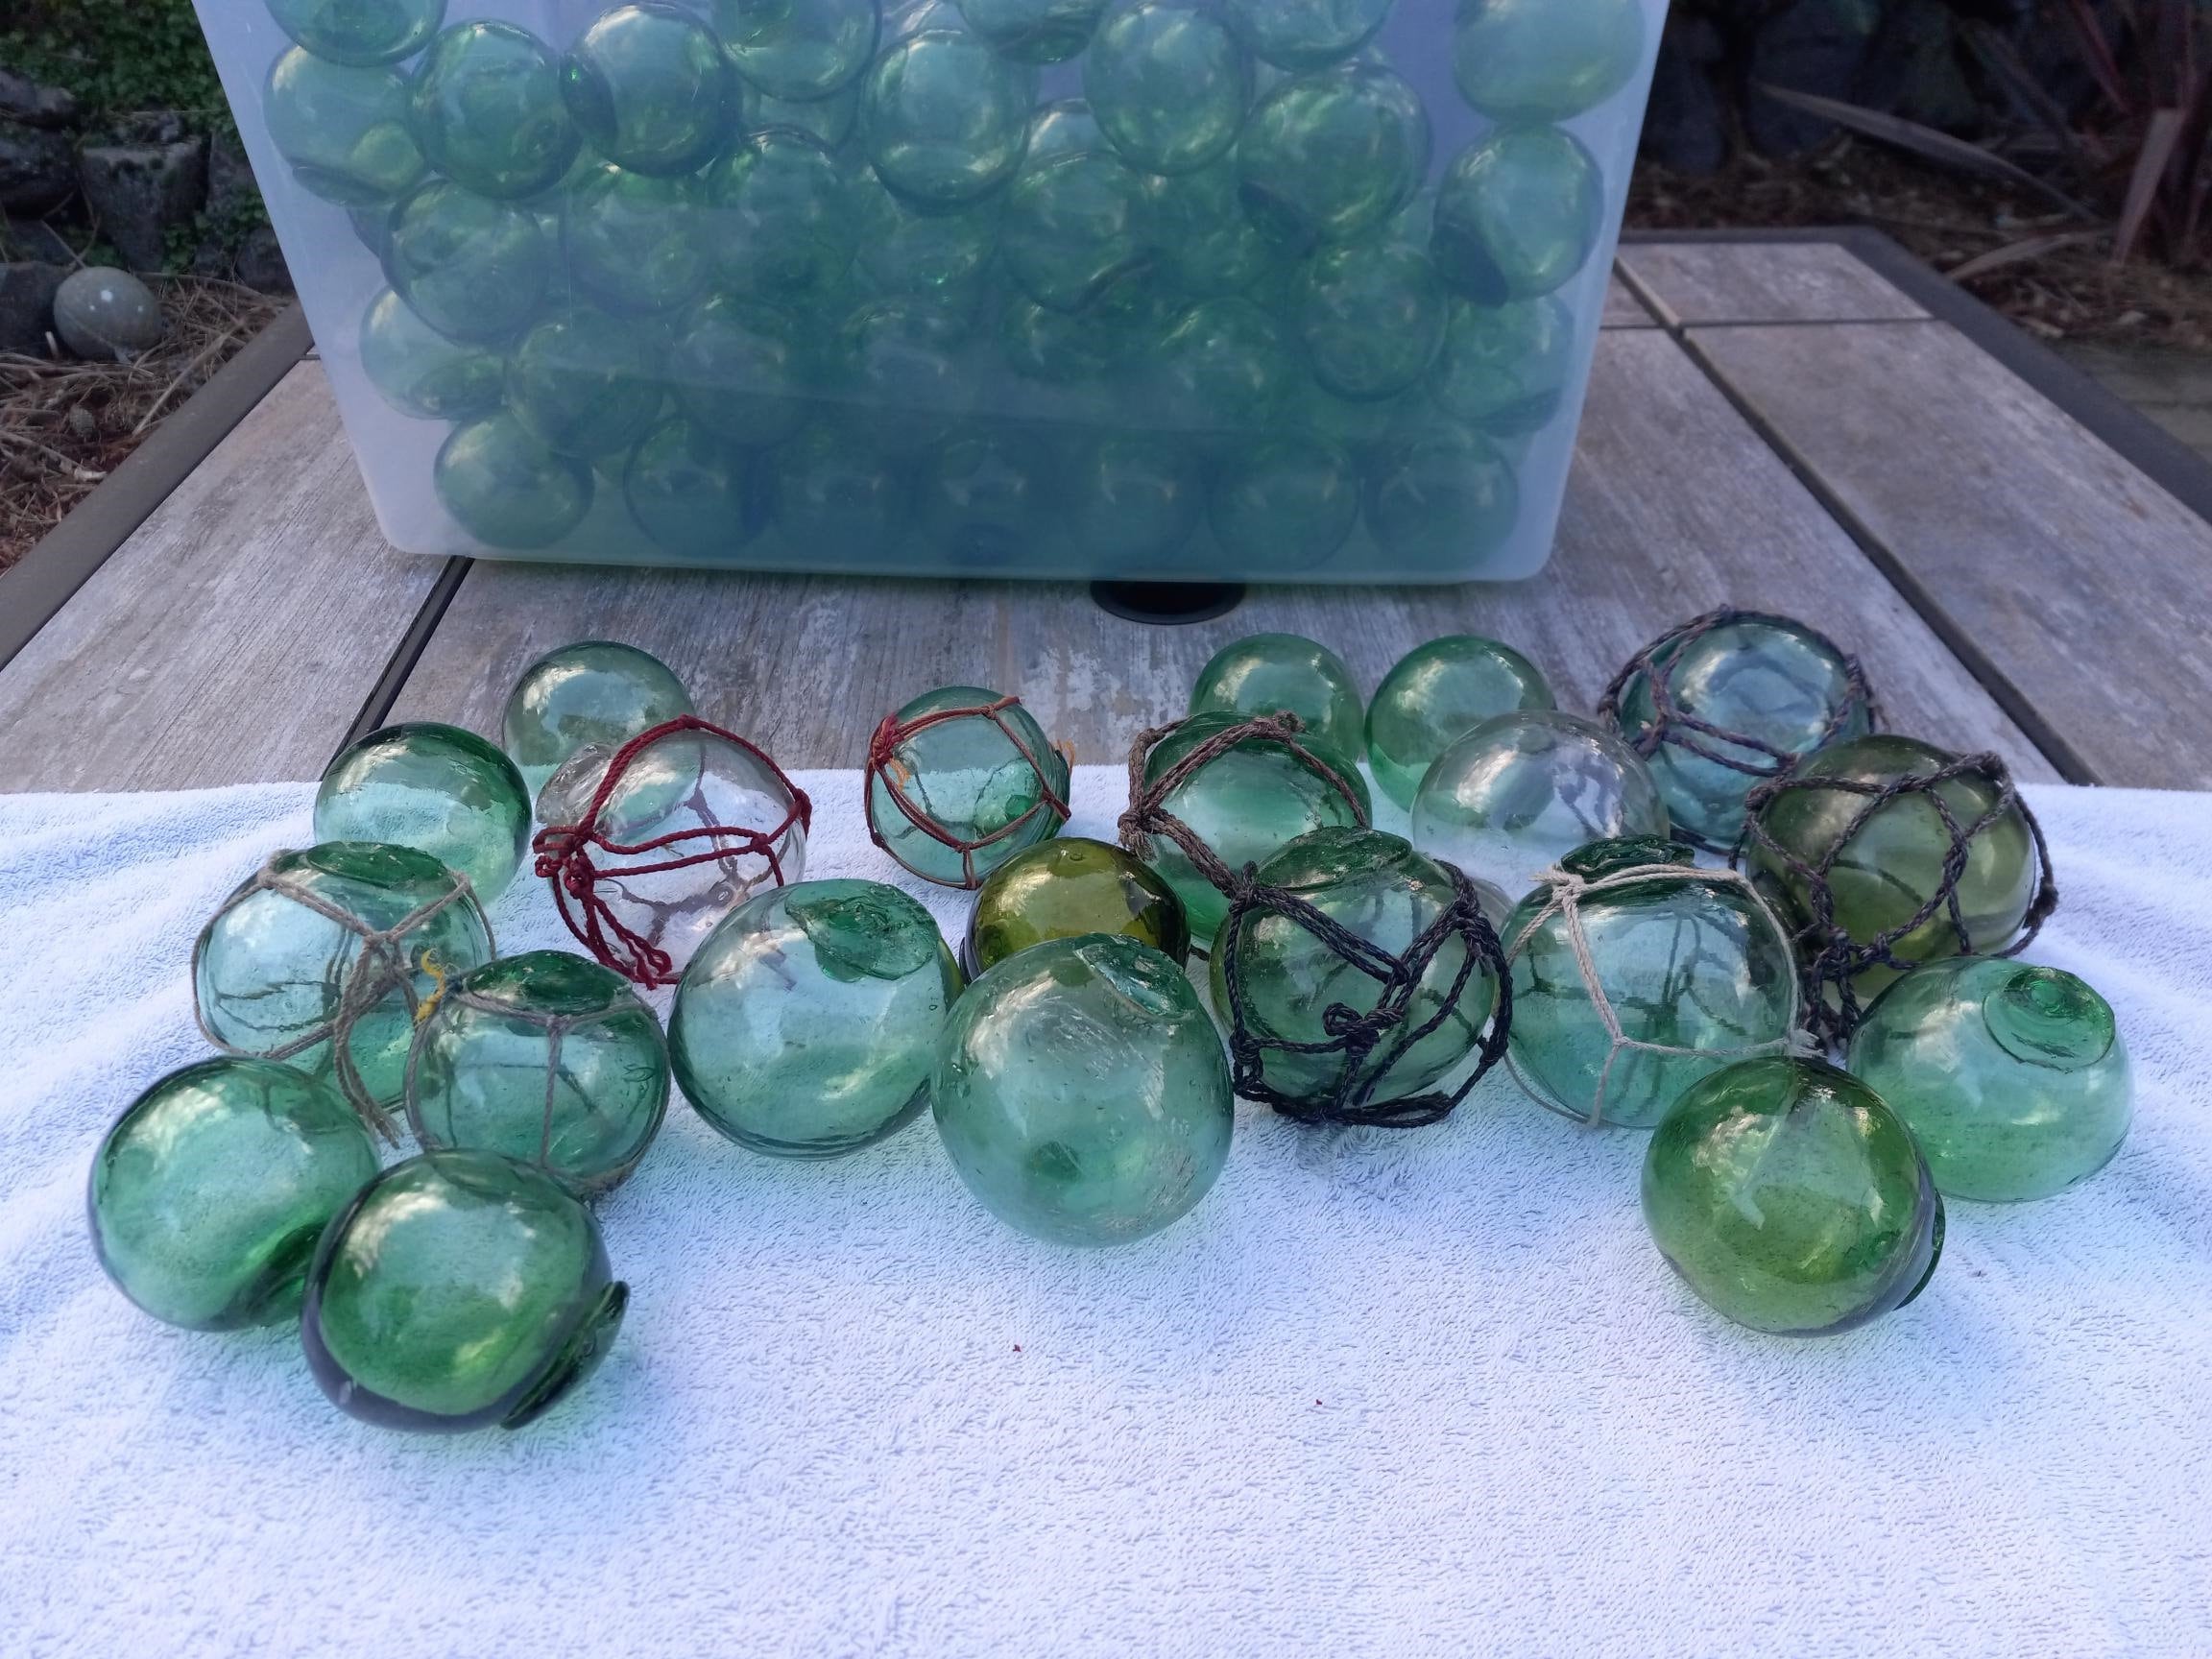 Old Vintage Japanese Glass Fishing Floats, Only 6.50 Each Star